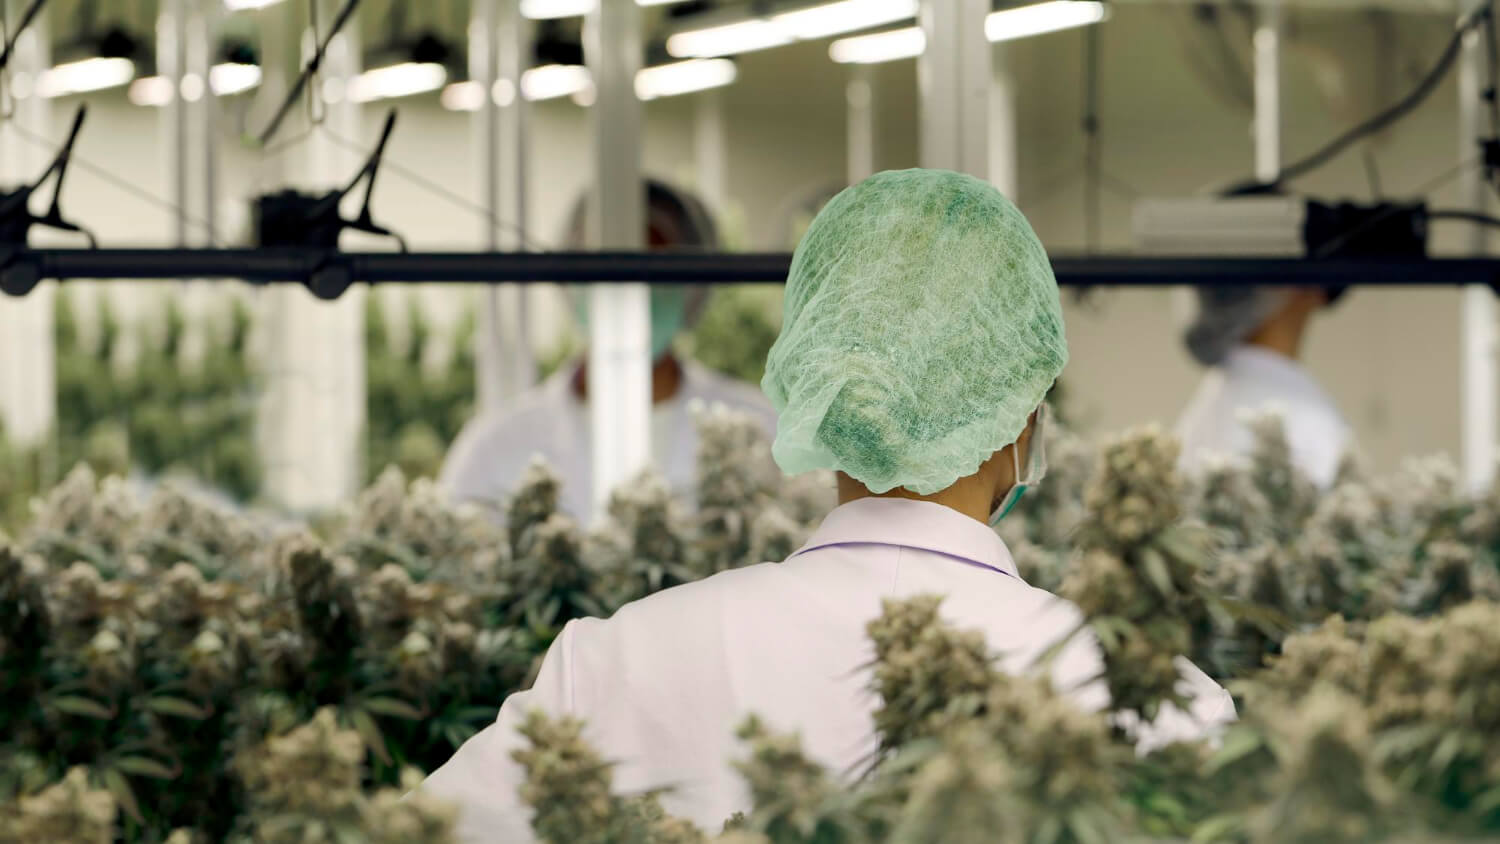 Tilray Brands set to announce Q1 results on October 4th